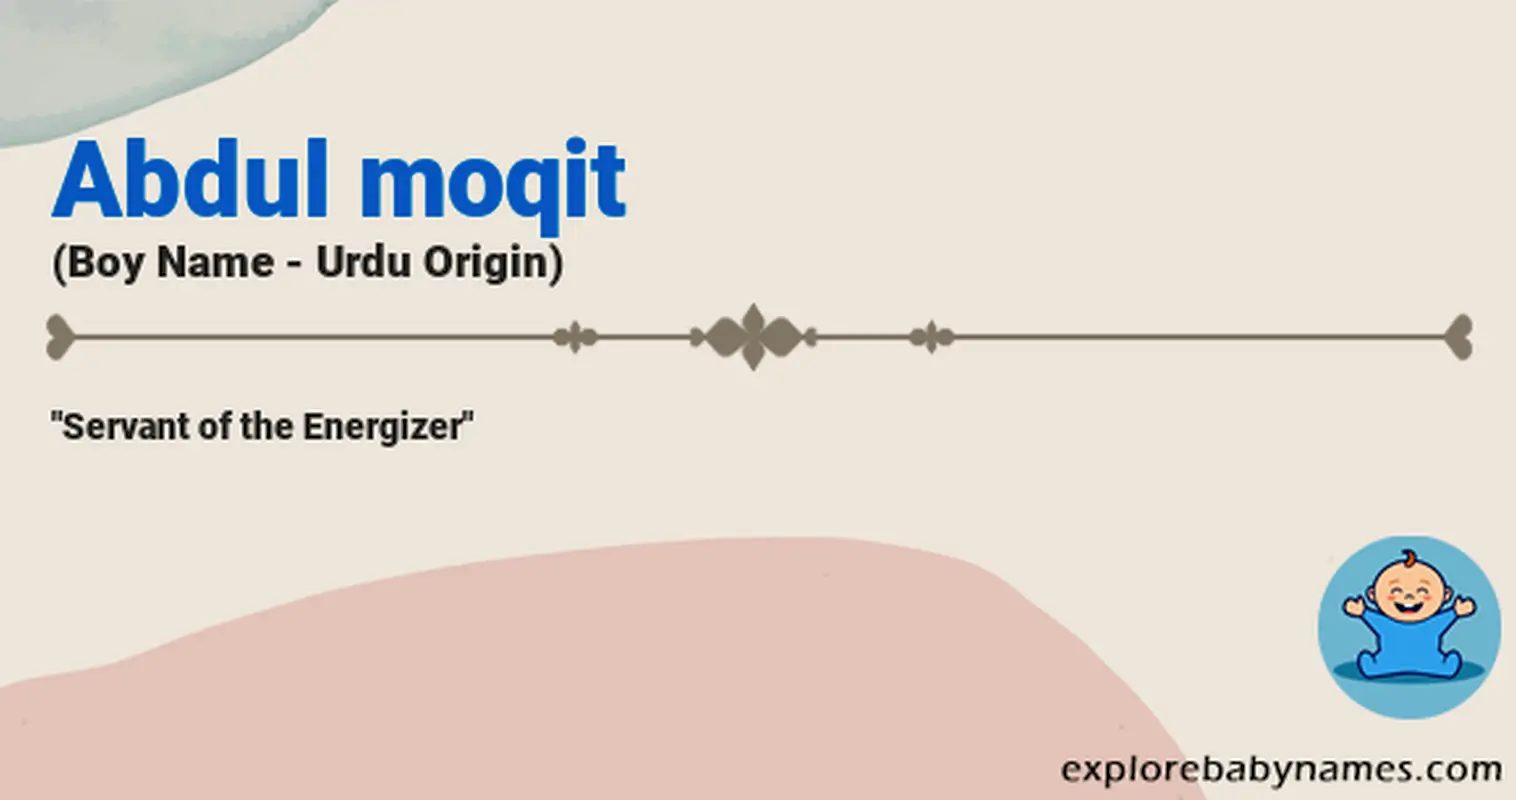 Meaning of Abdul moqit